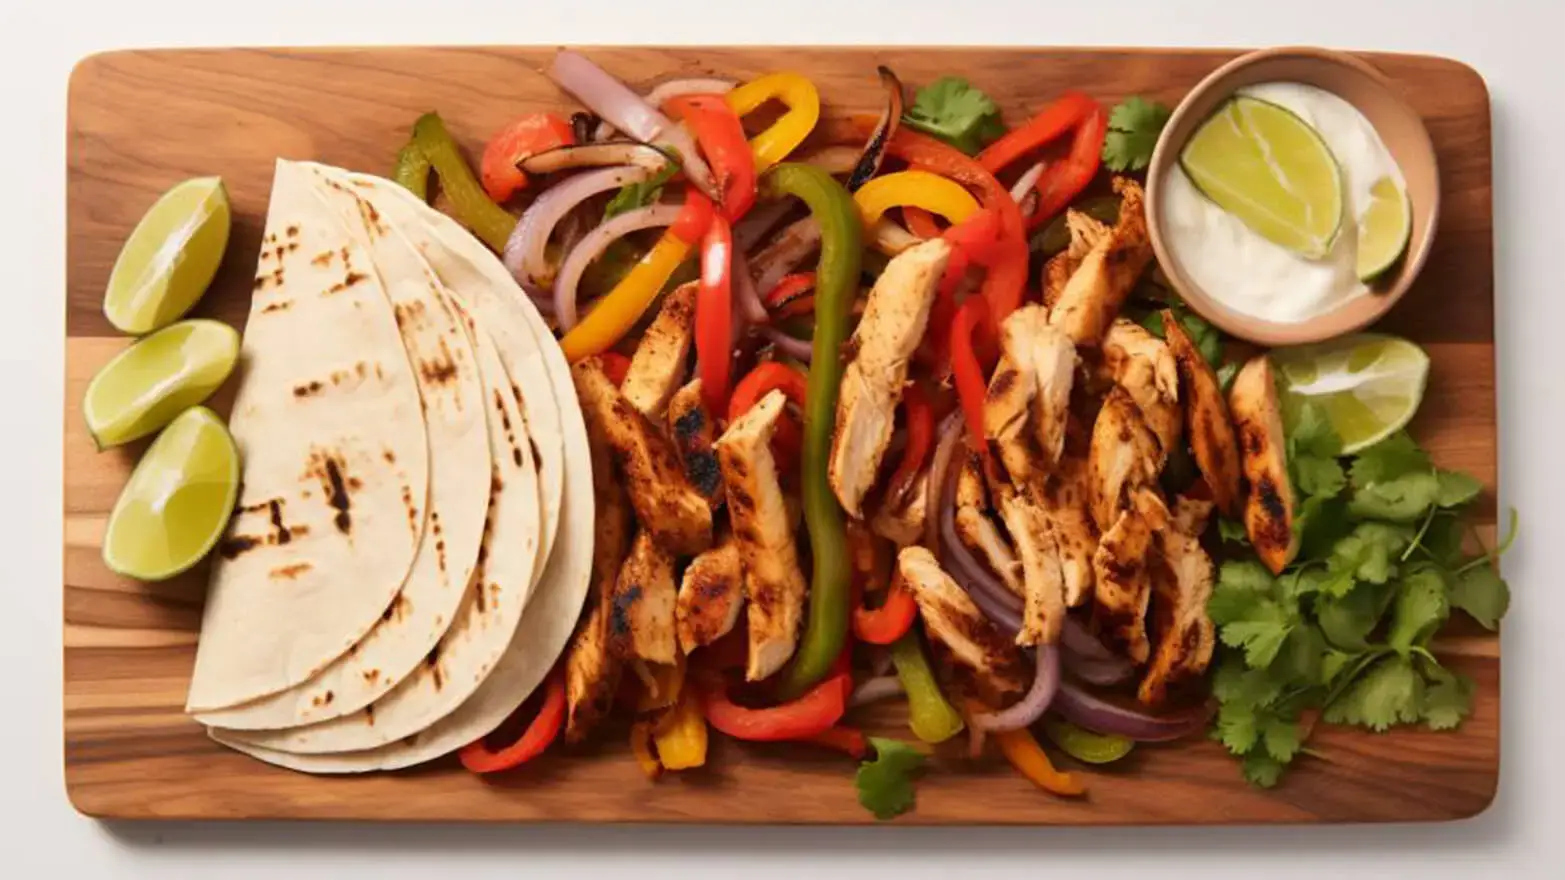 chicken fajitas with grilled veggies and tortillas 